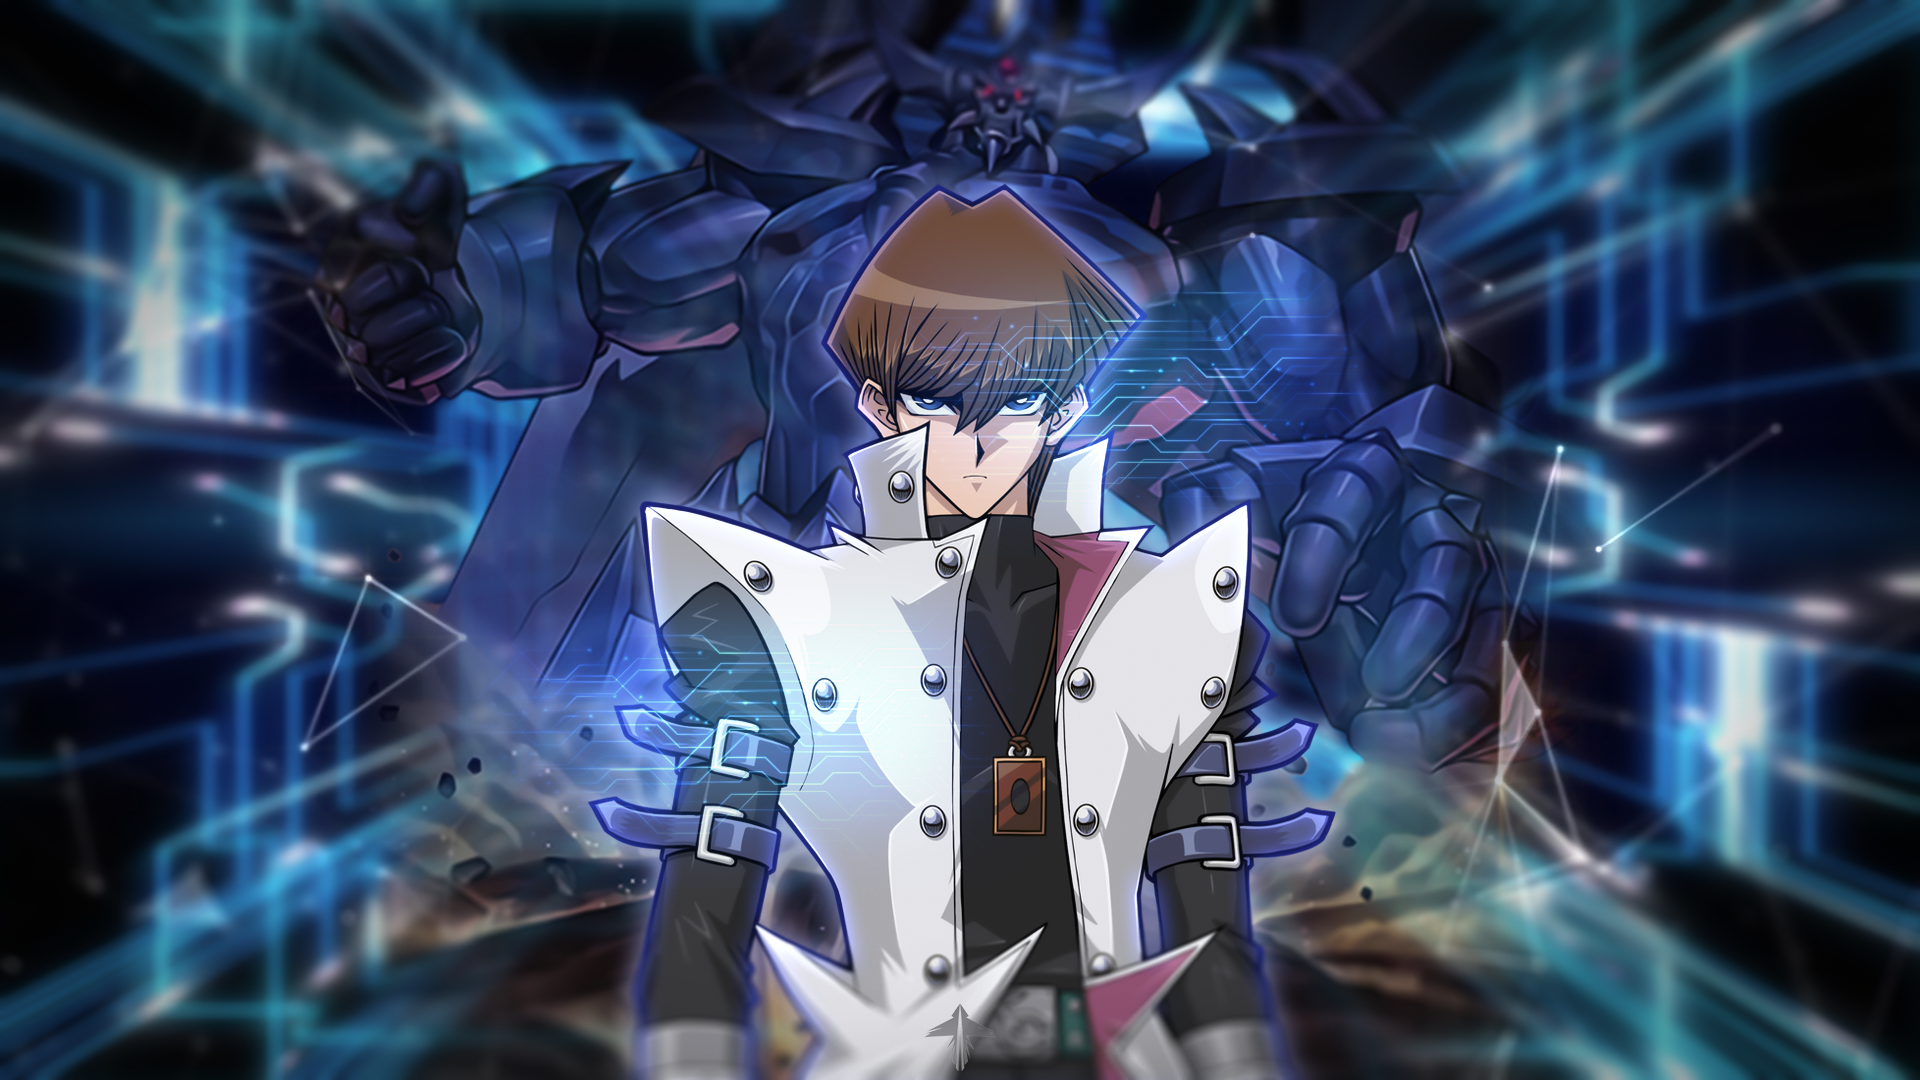 Imageand Here S Another One With Kaiba Futuristic Background